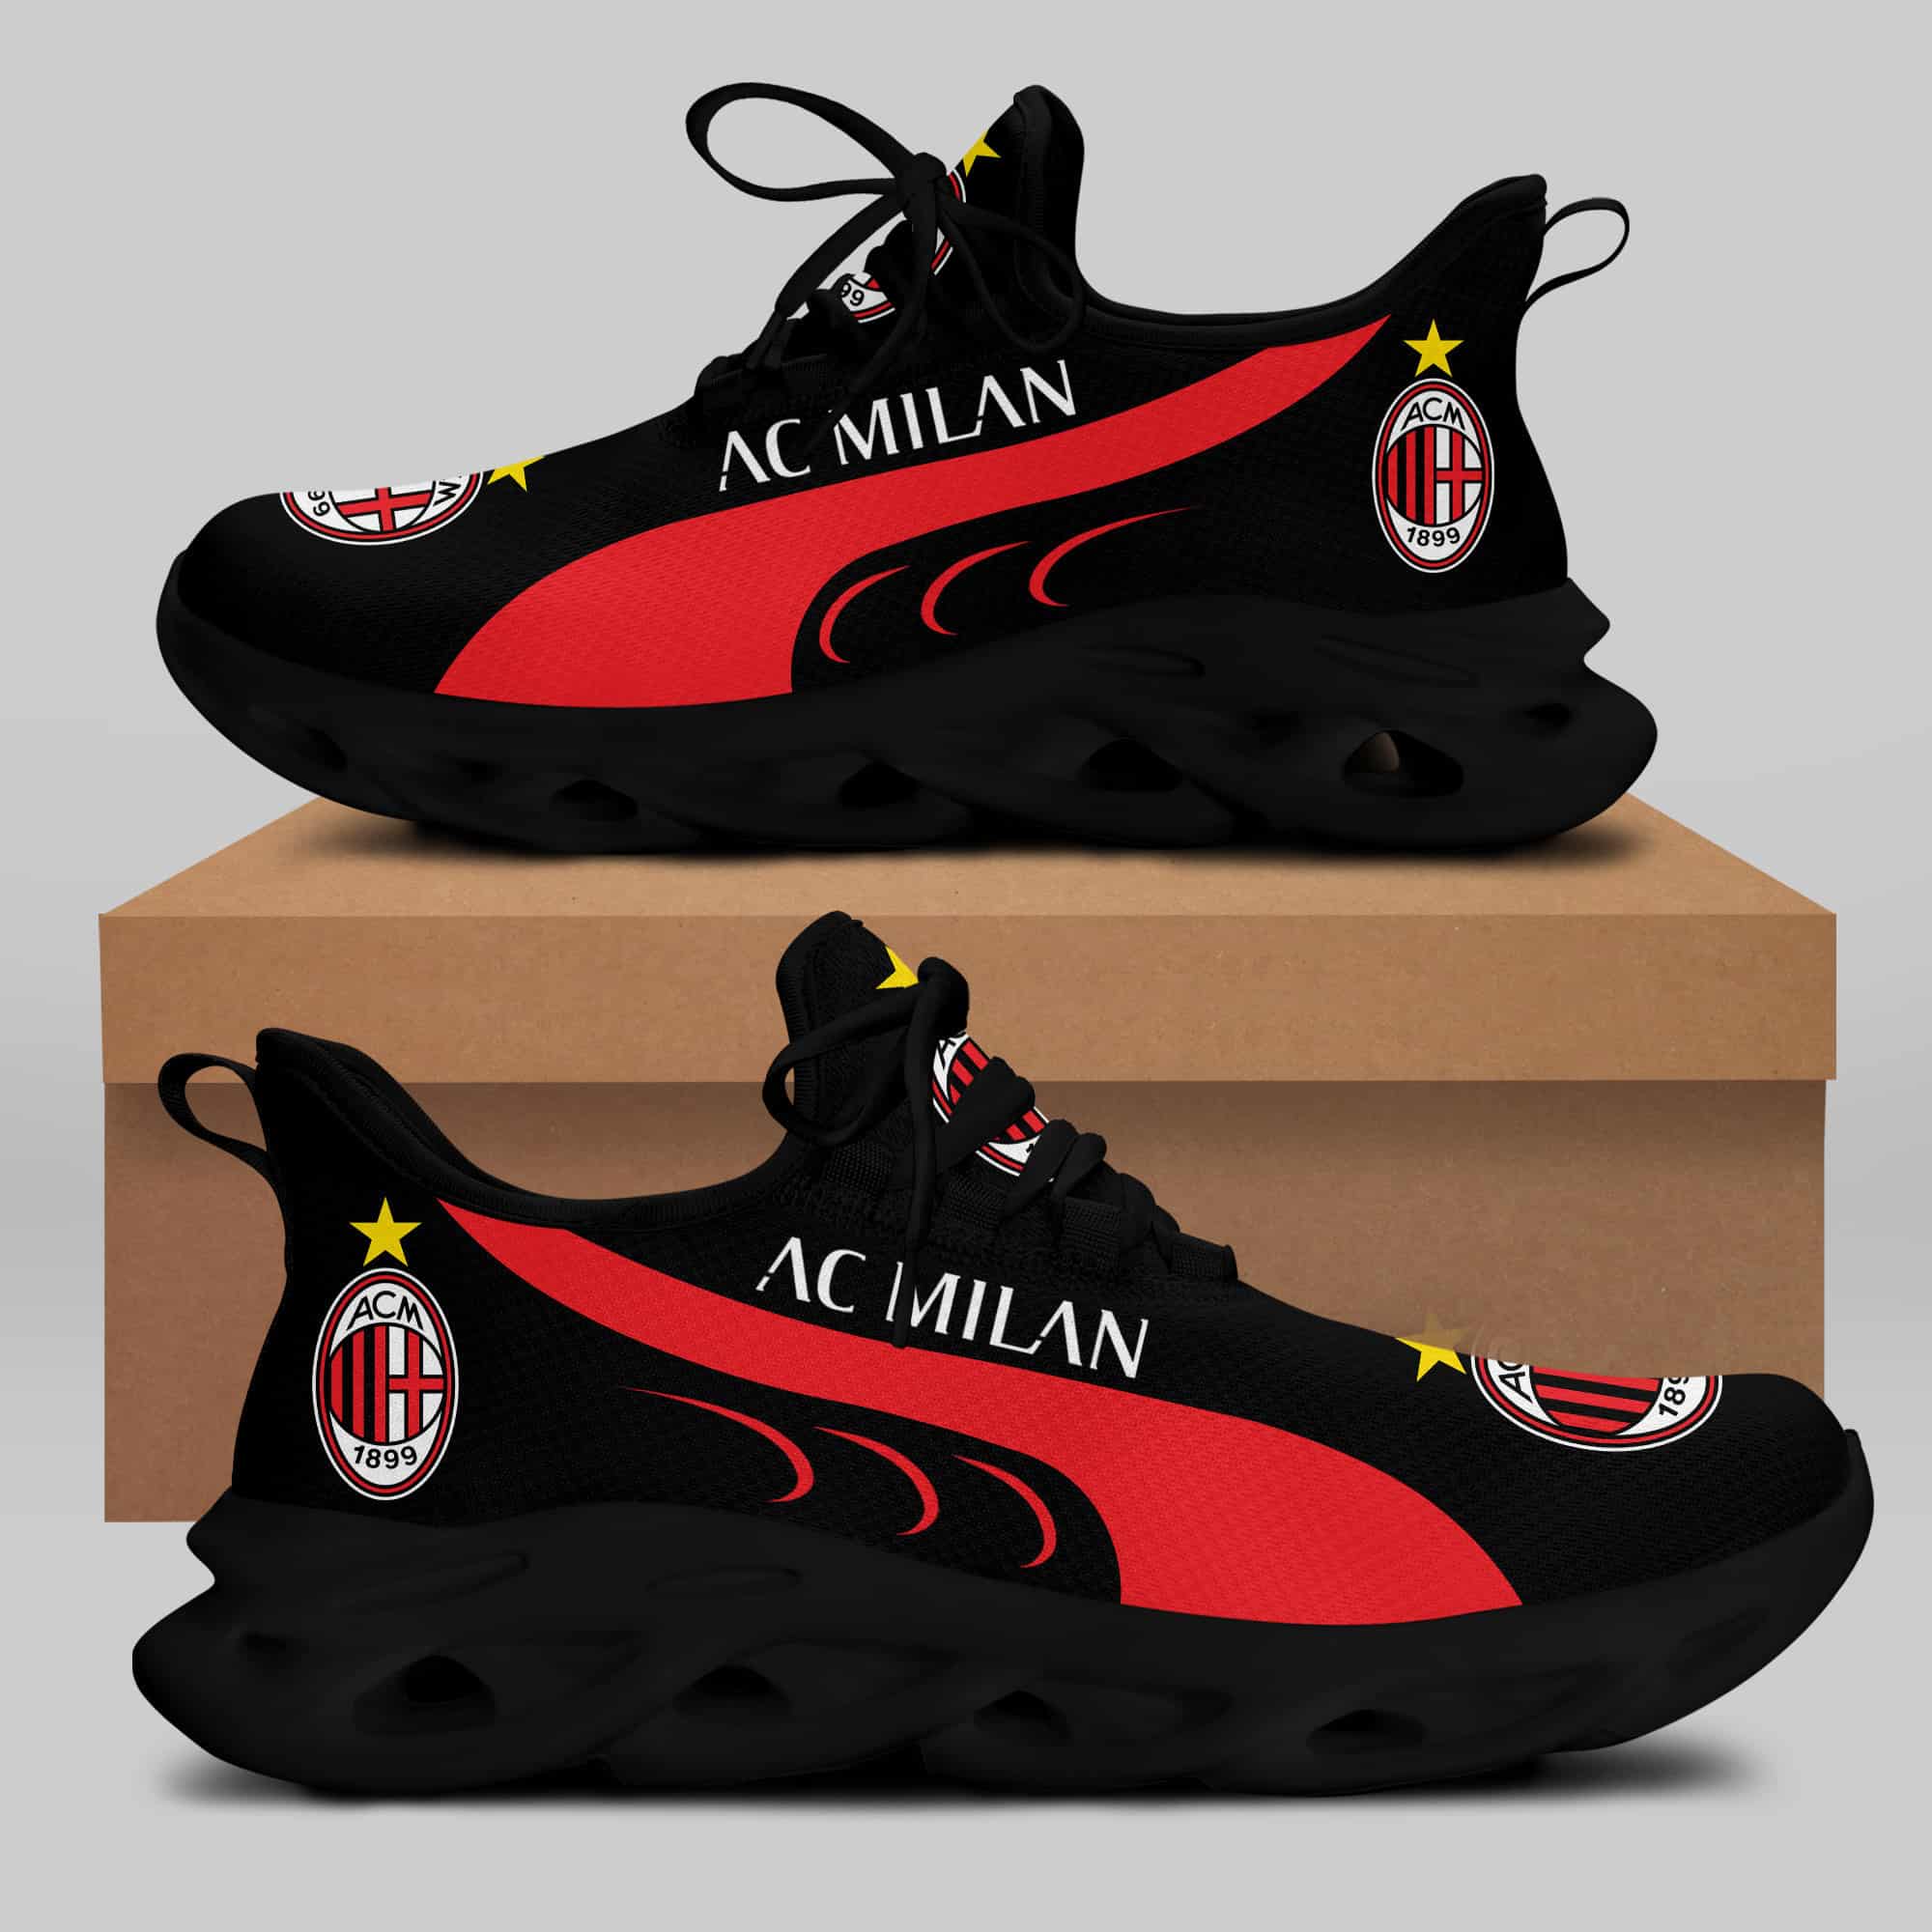 Ac Milan Running Shoes Max Soul Shoes Sneakers Ver 1 1